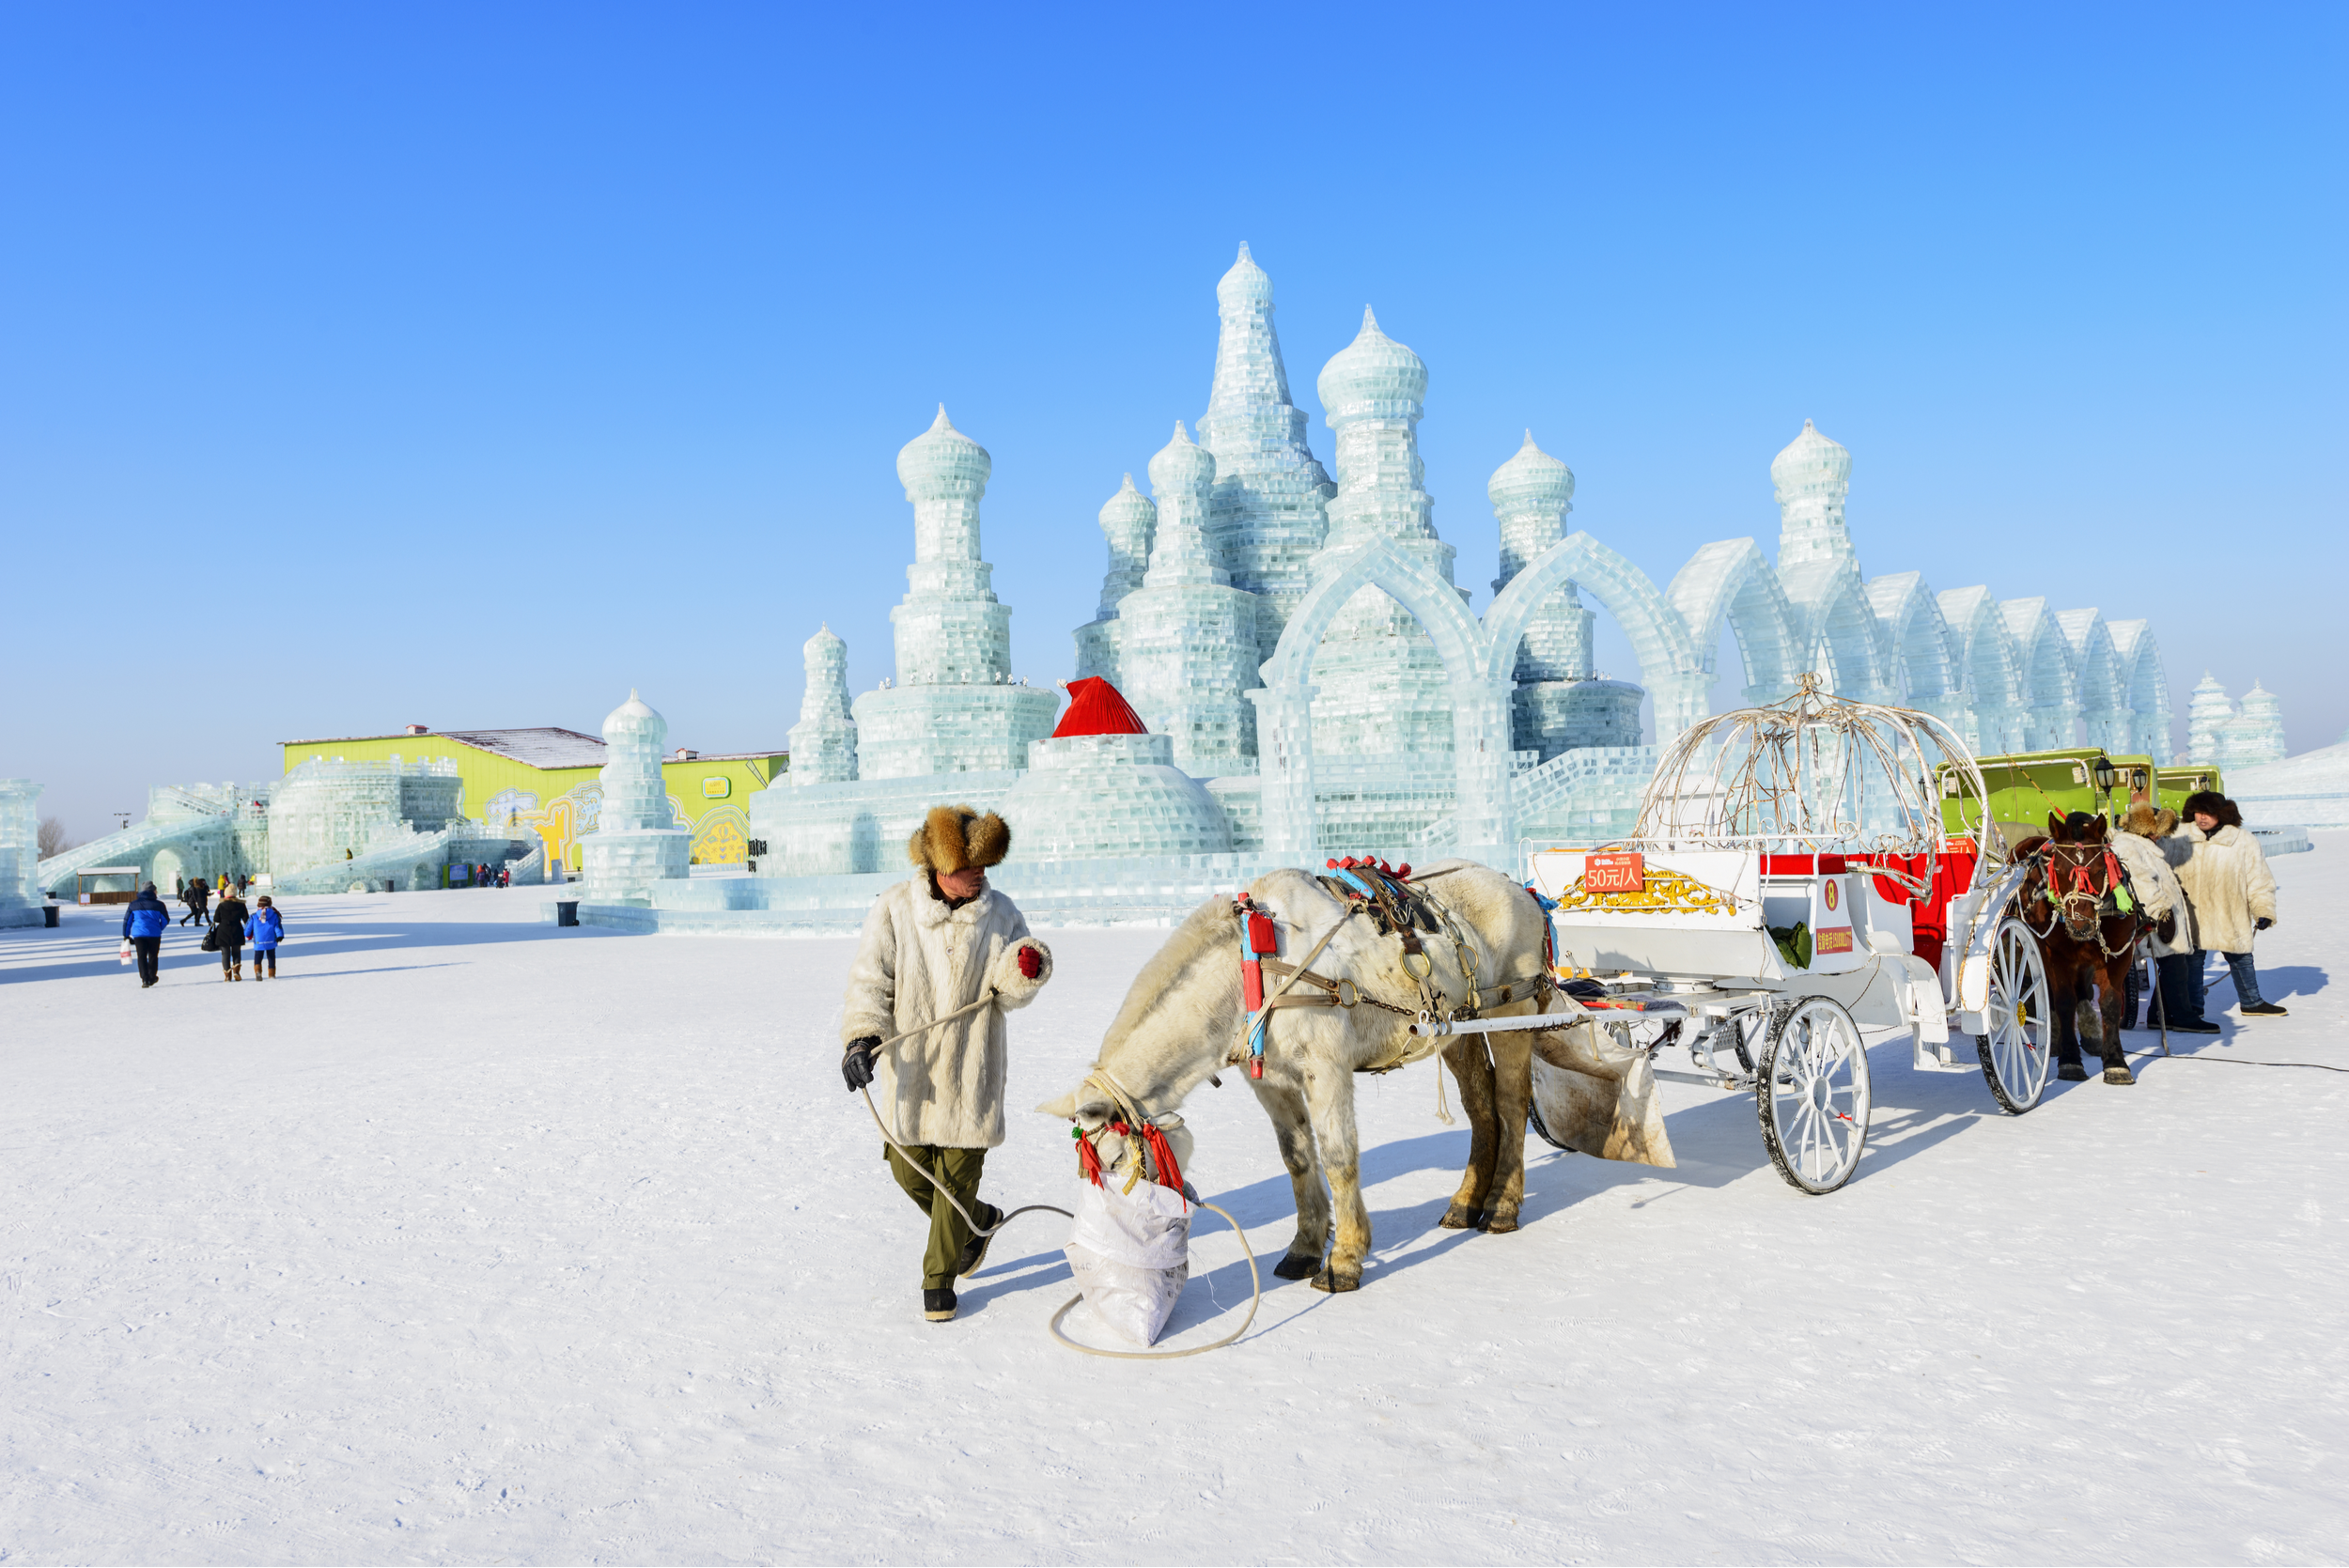 4 Whimsical Icy Attractions You Can Only Visit This Season — Catch These Frozen Fun Before They’re Gone